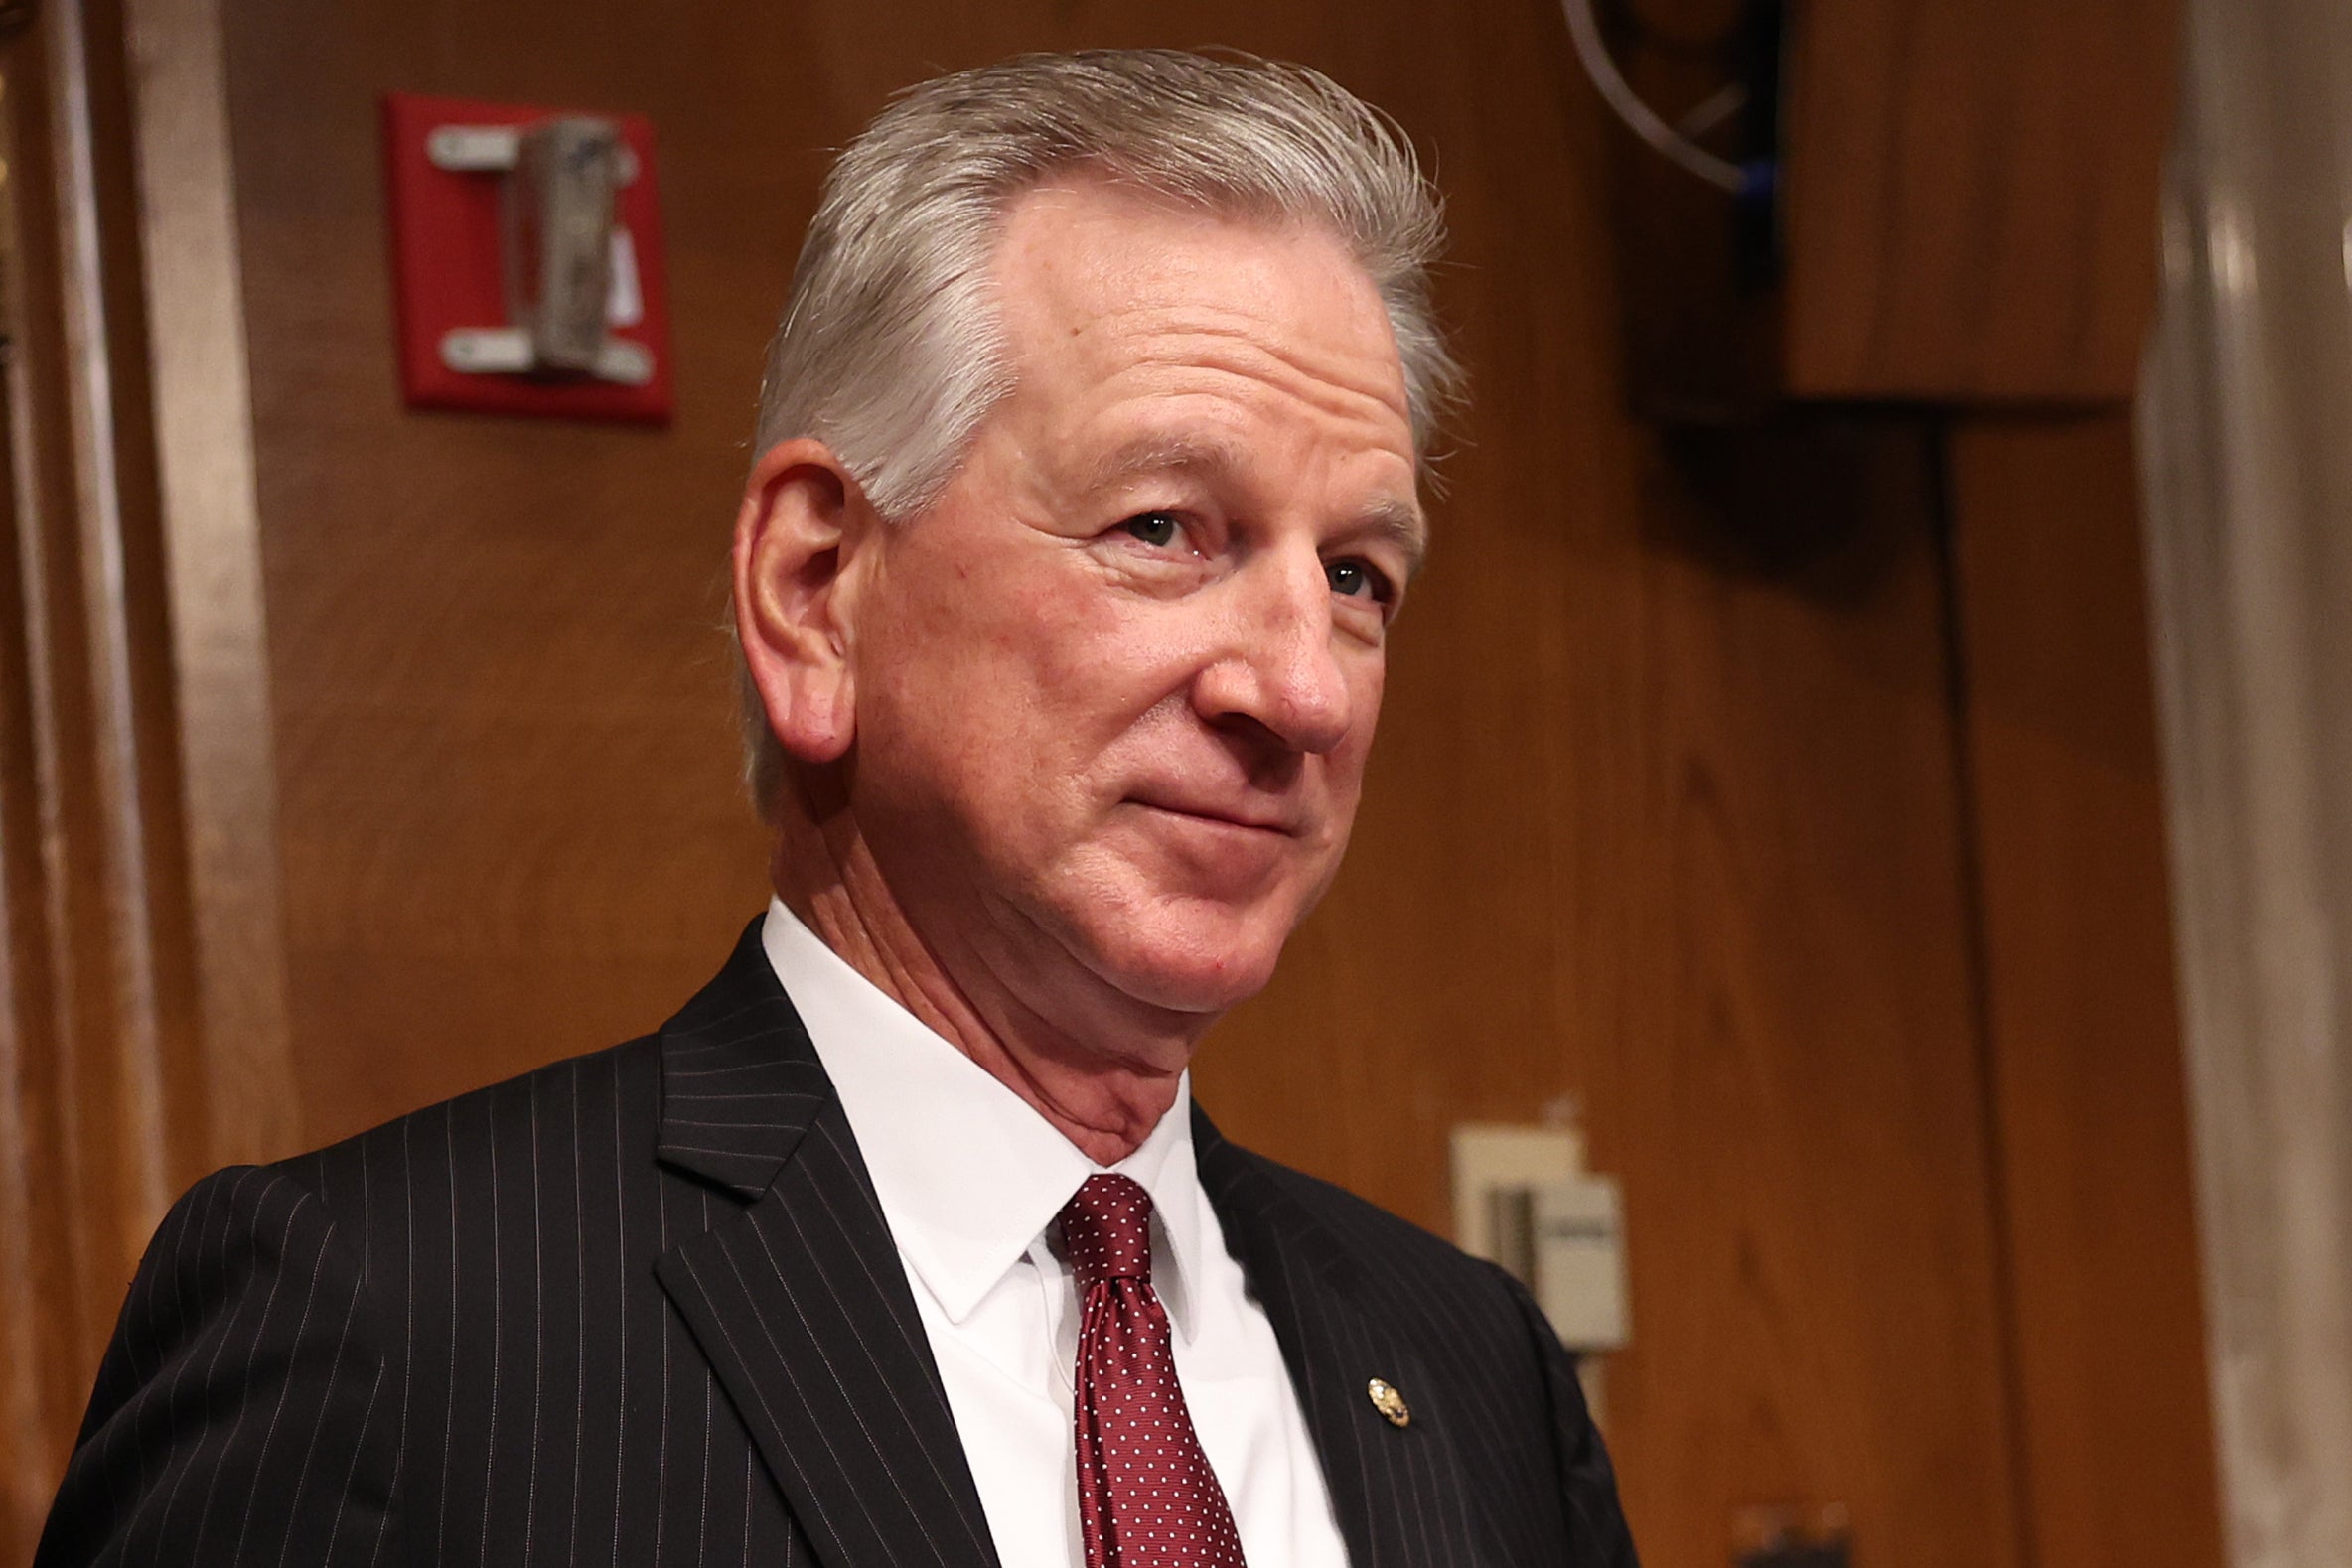 U.S. Sen. Tommy Tuberville (R-AL) arrives for the Senate Health, Education, Labor and Pensions Committee confirmation hearing for Monica Bertagnolli to be the next Director of the National Institutes of Health